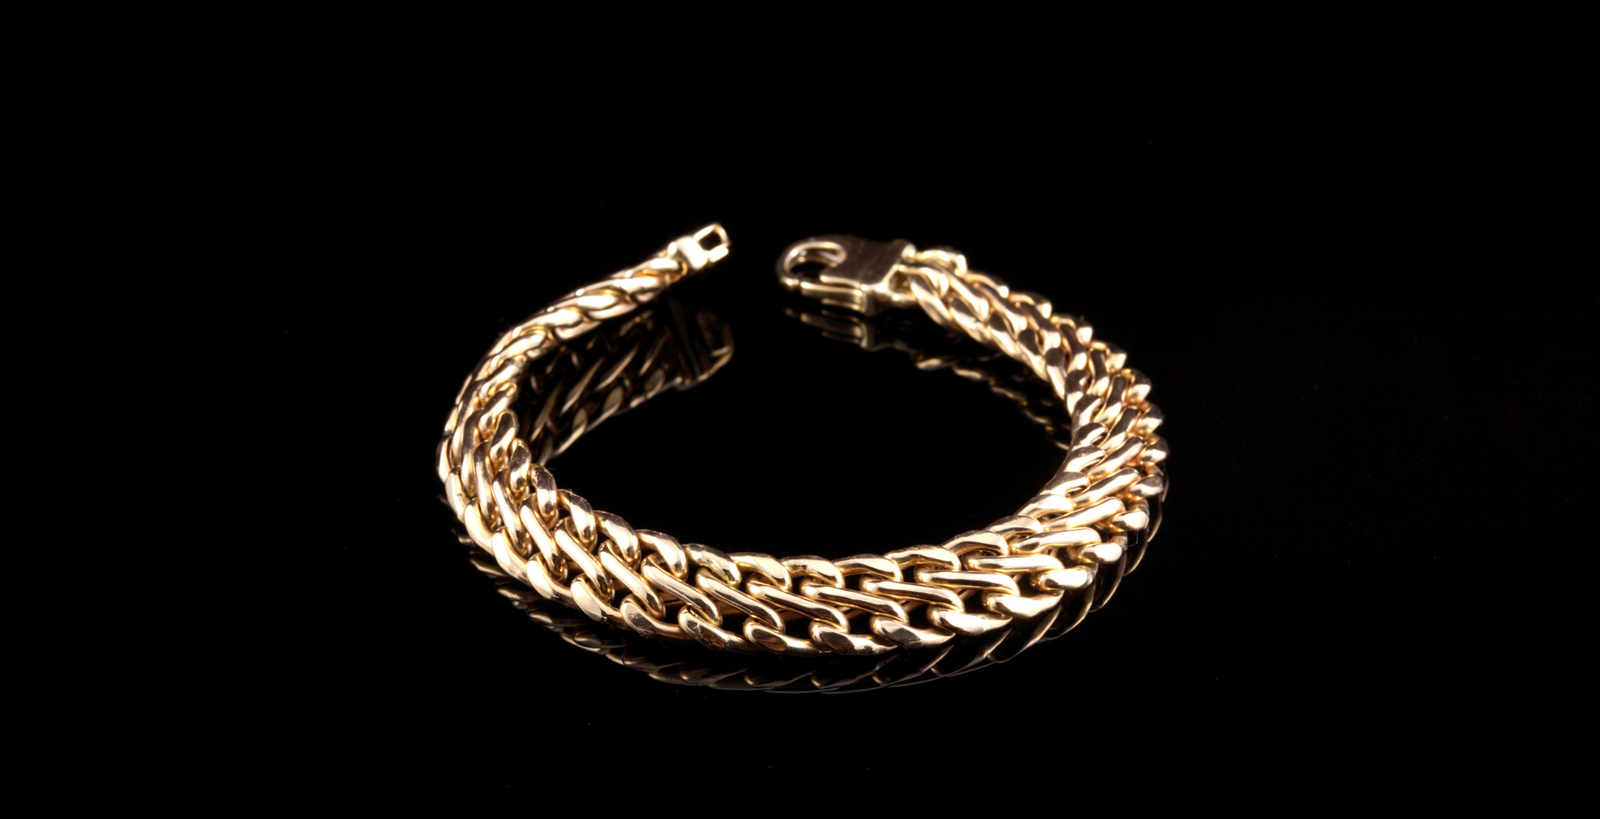 Range of Fashionable Men's Bracelets to Carry Out an Amazing Look Every Day  - Seven Rocks